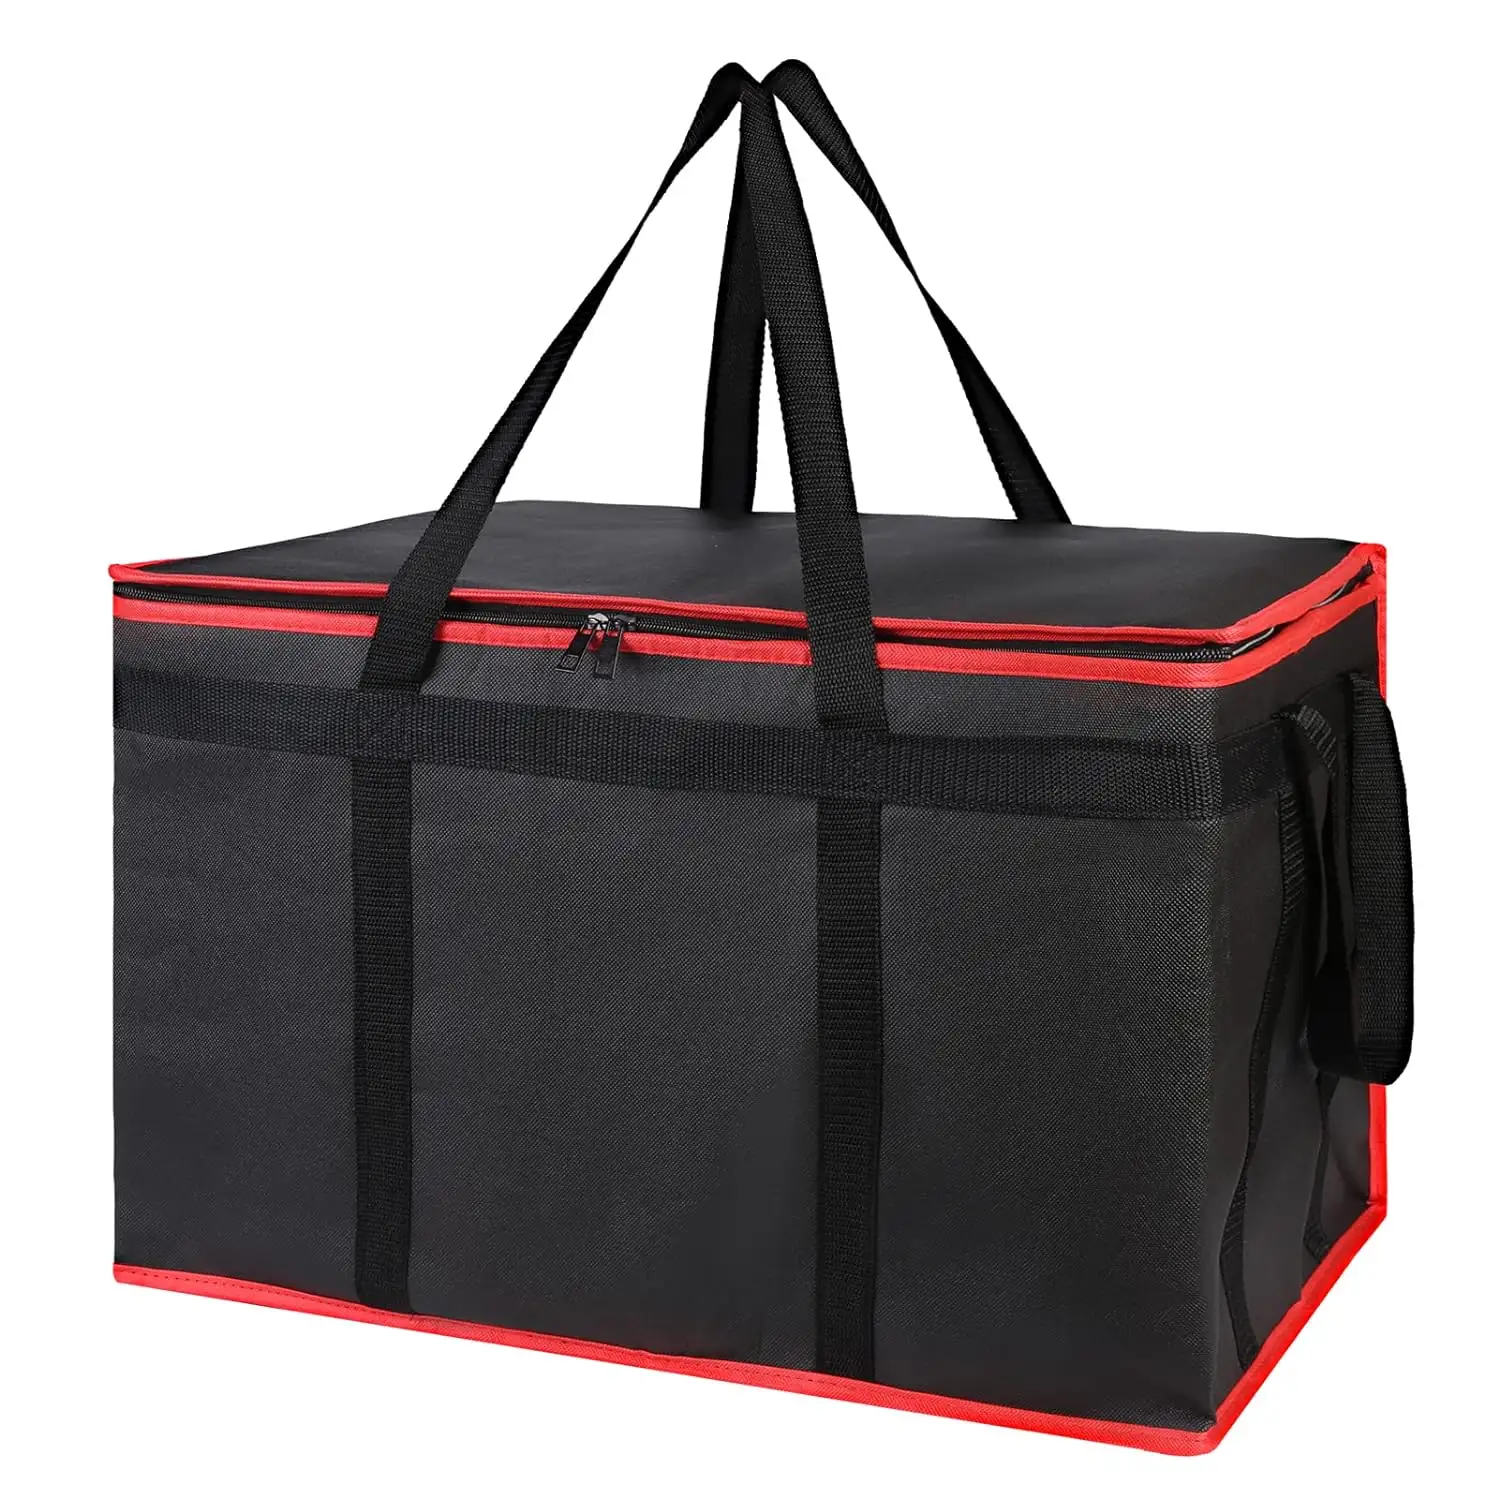 Reusable Thermal Insulated Cooler Bag Grocery Cool Carry Non Woven Lunch Cooler Bag for Food